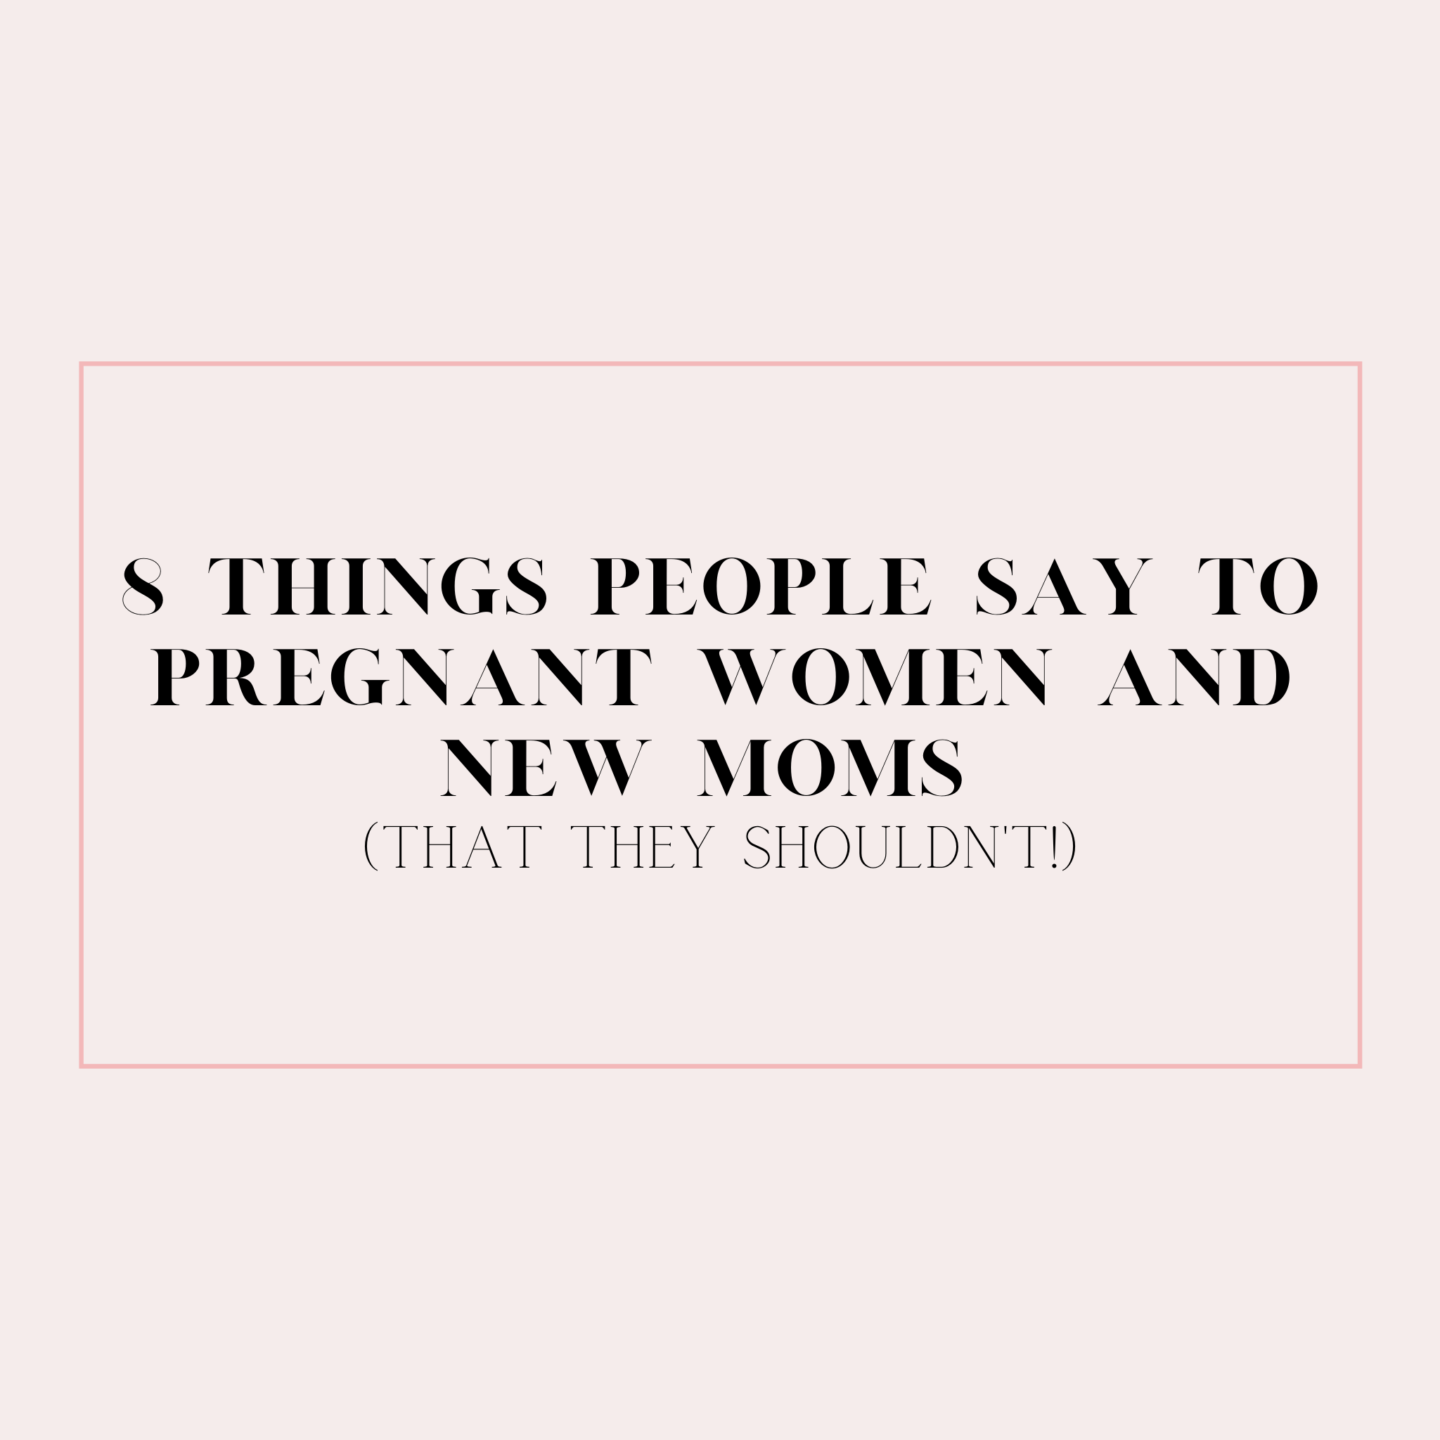 8 Things People Shouldn’t Say to Pregnant Women and New Moms